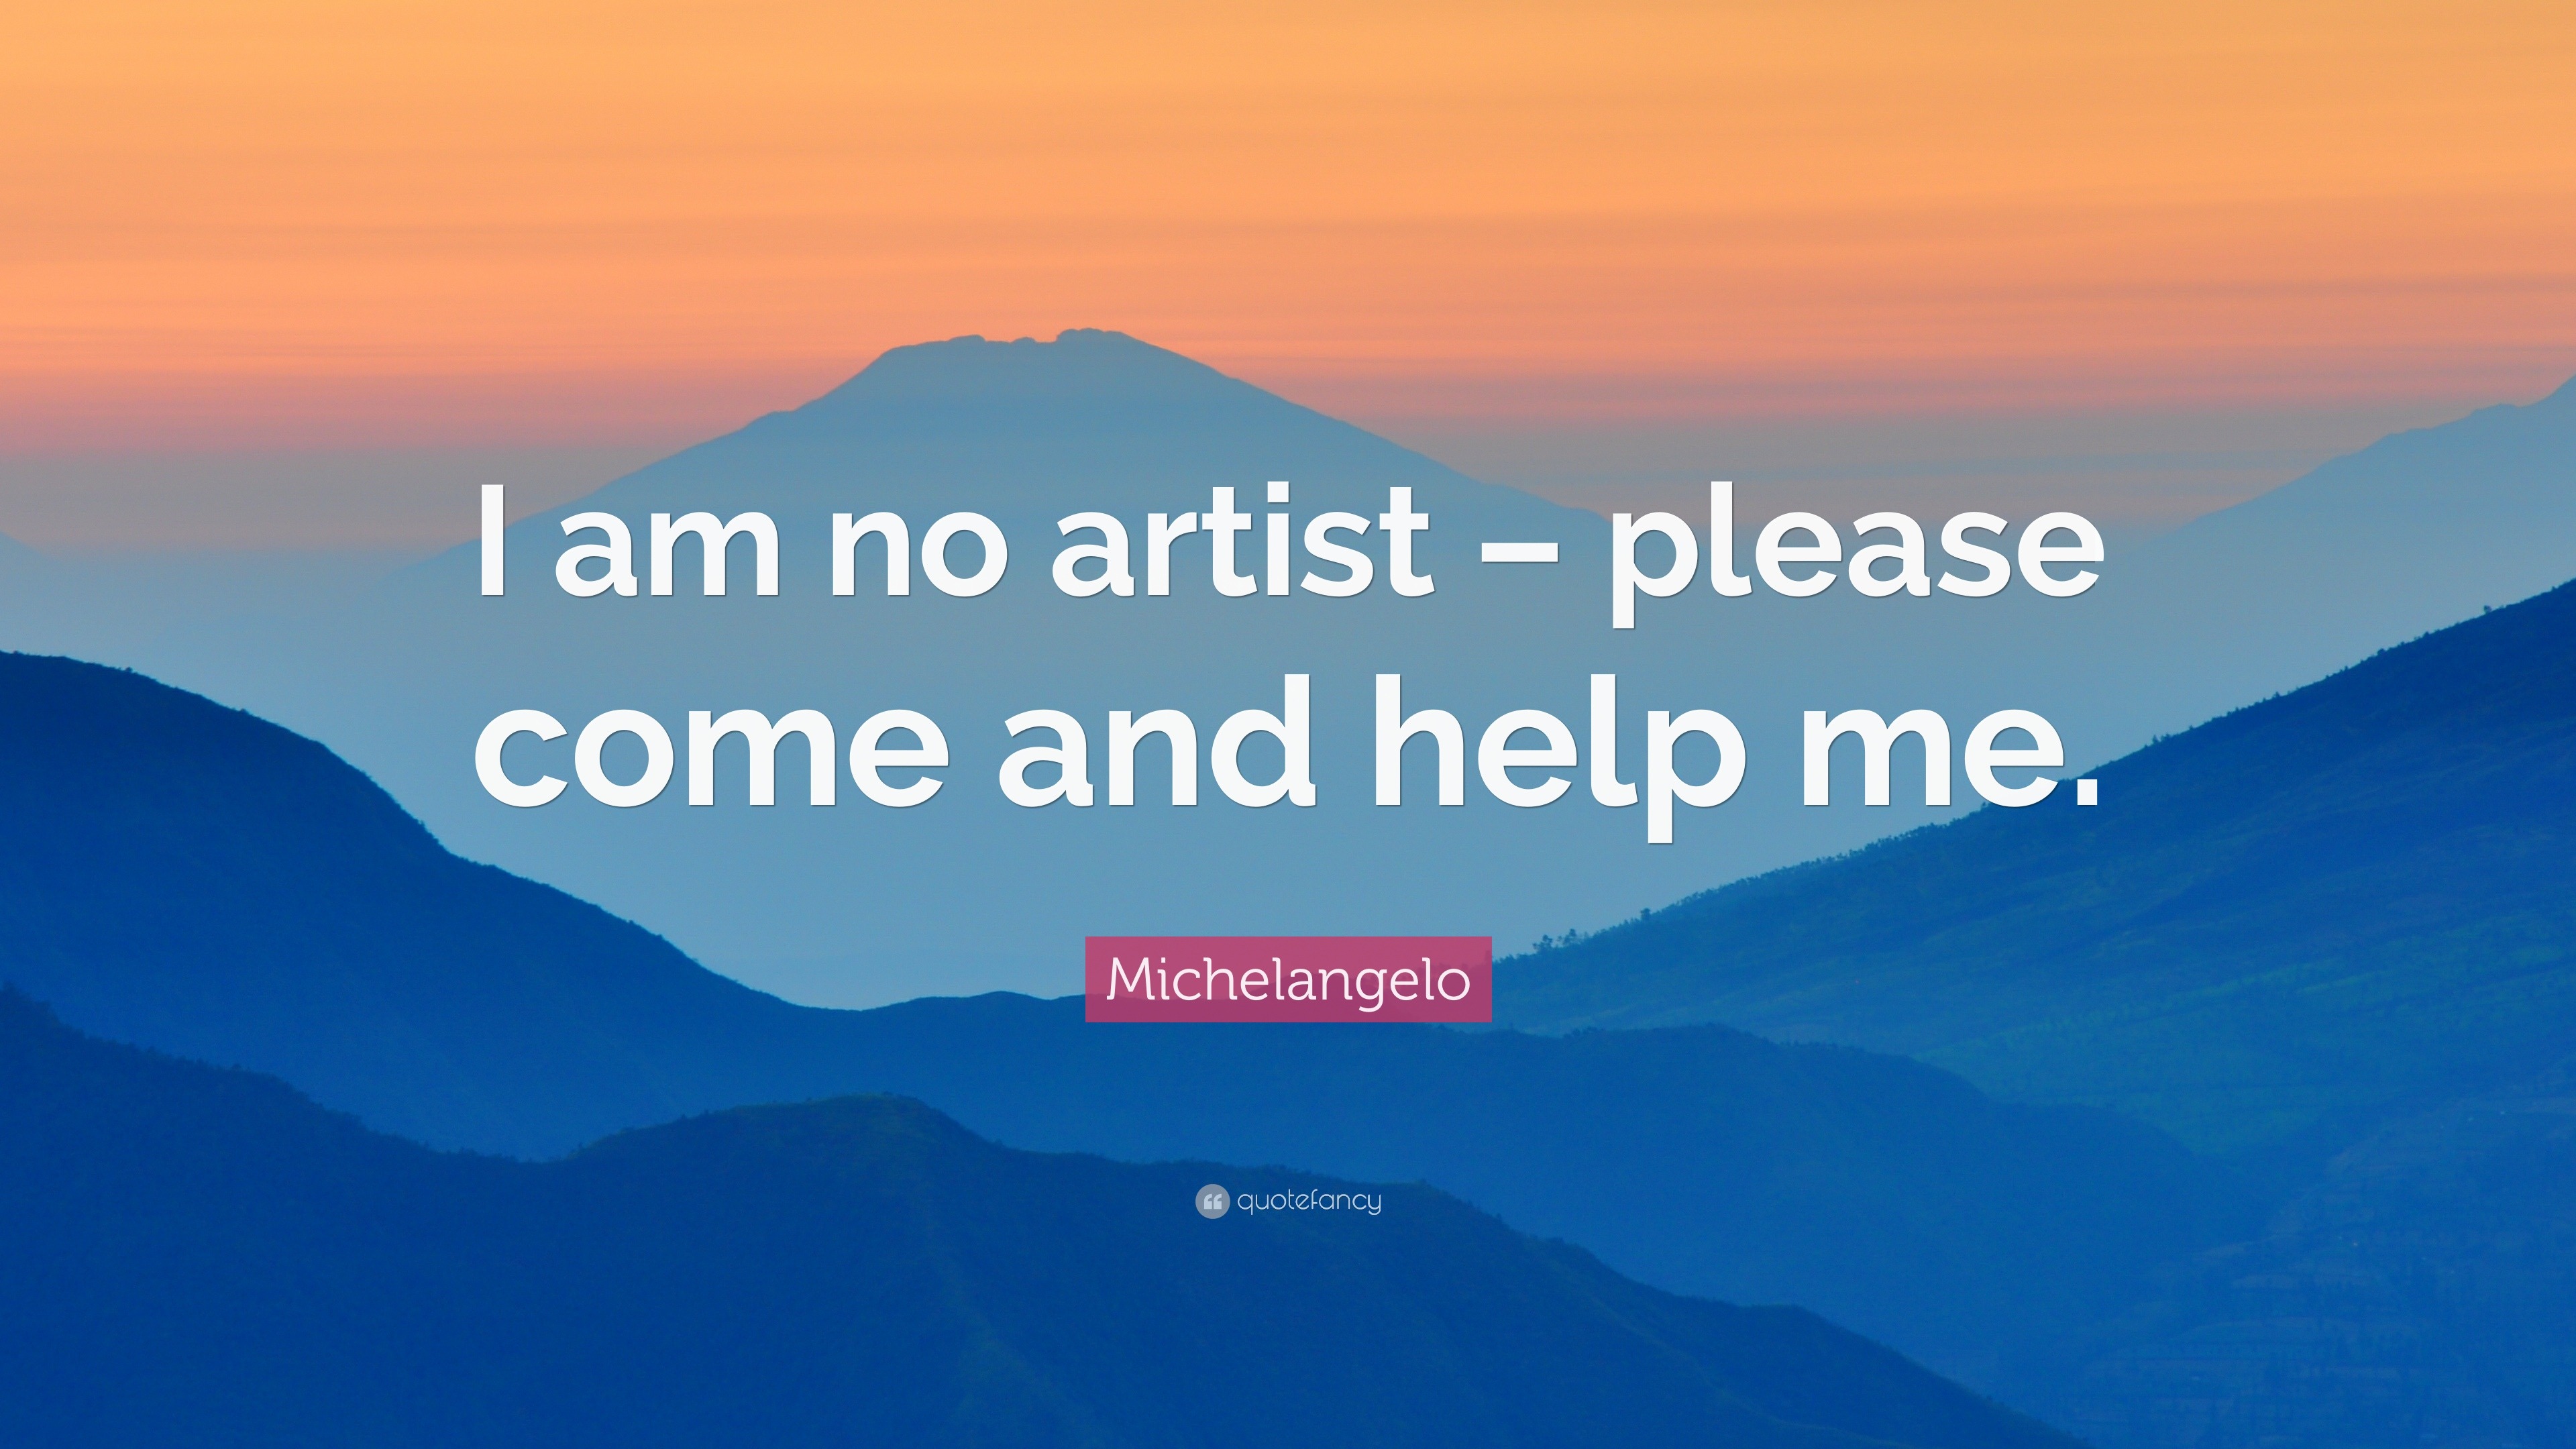 Michelangelo Quote: “I am no artist – please come and help me.”